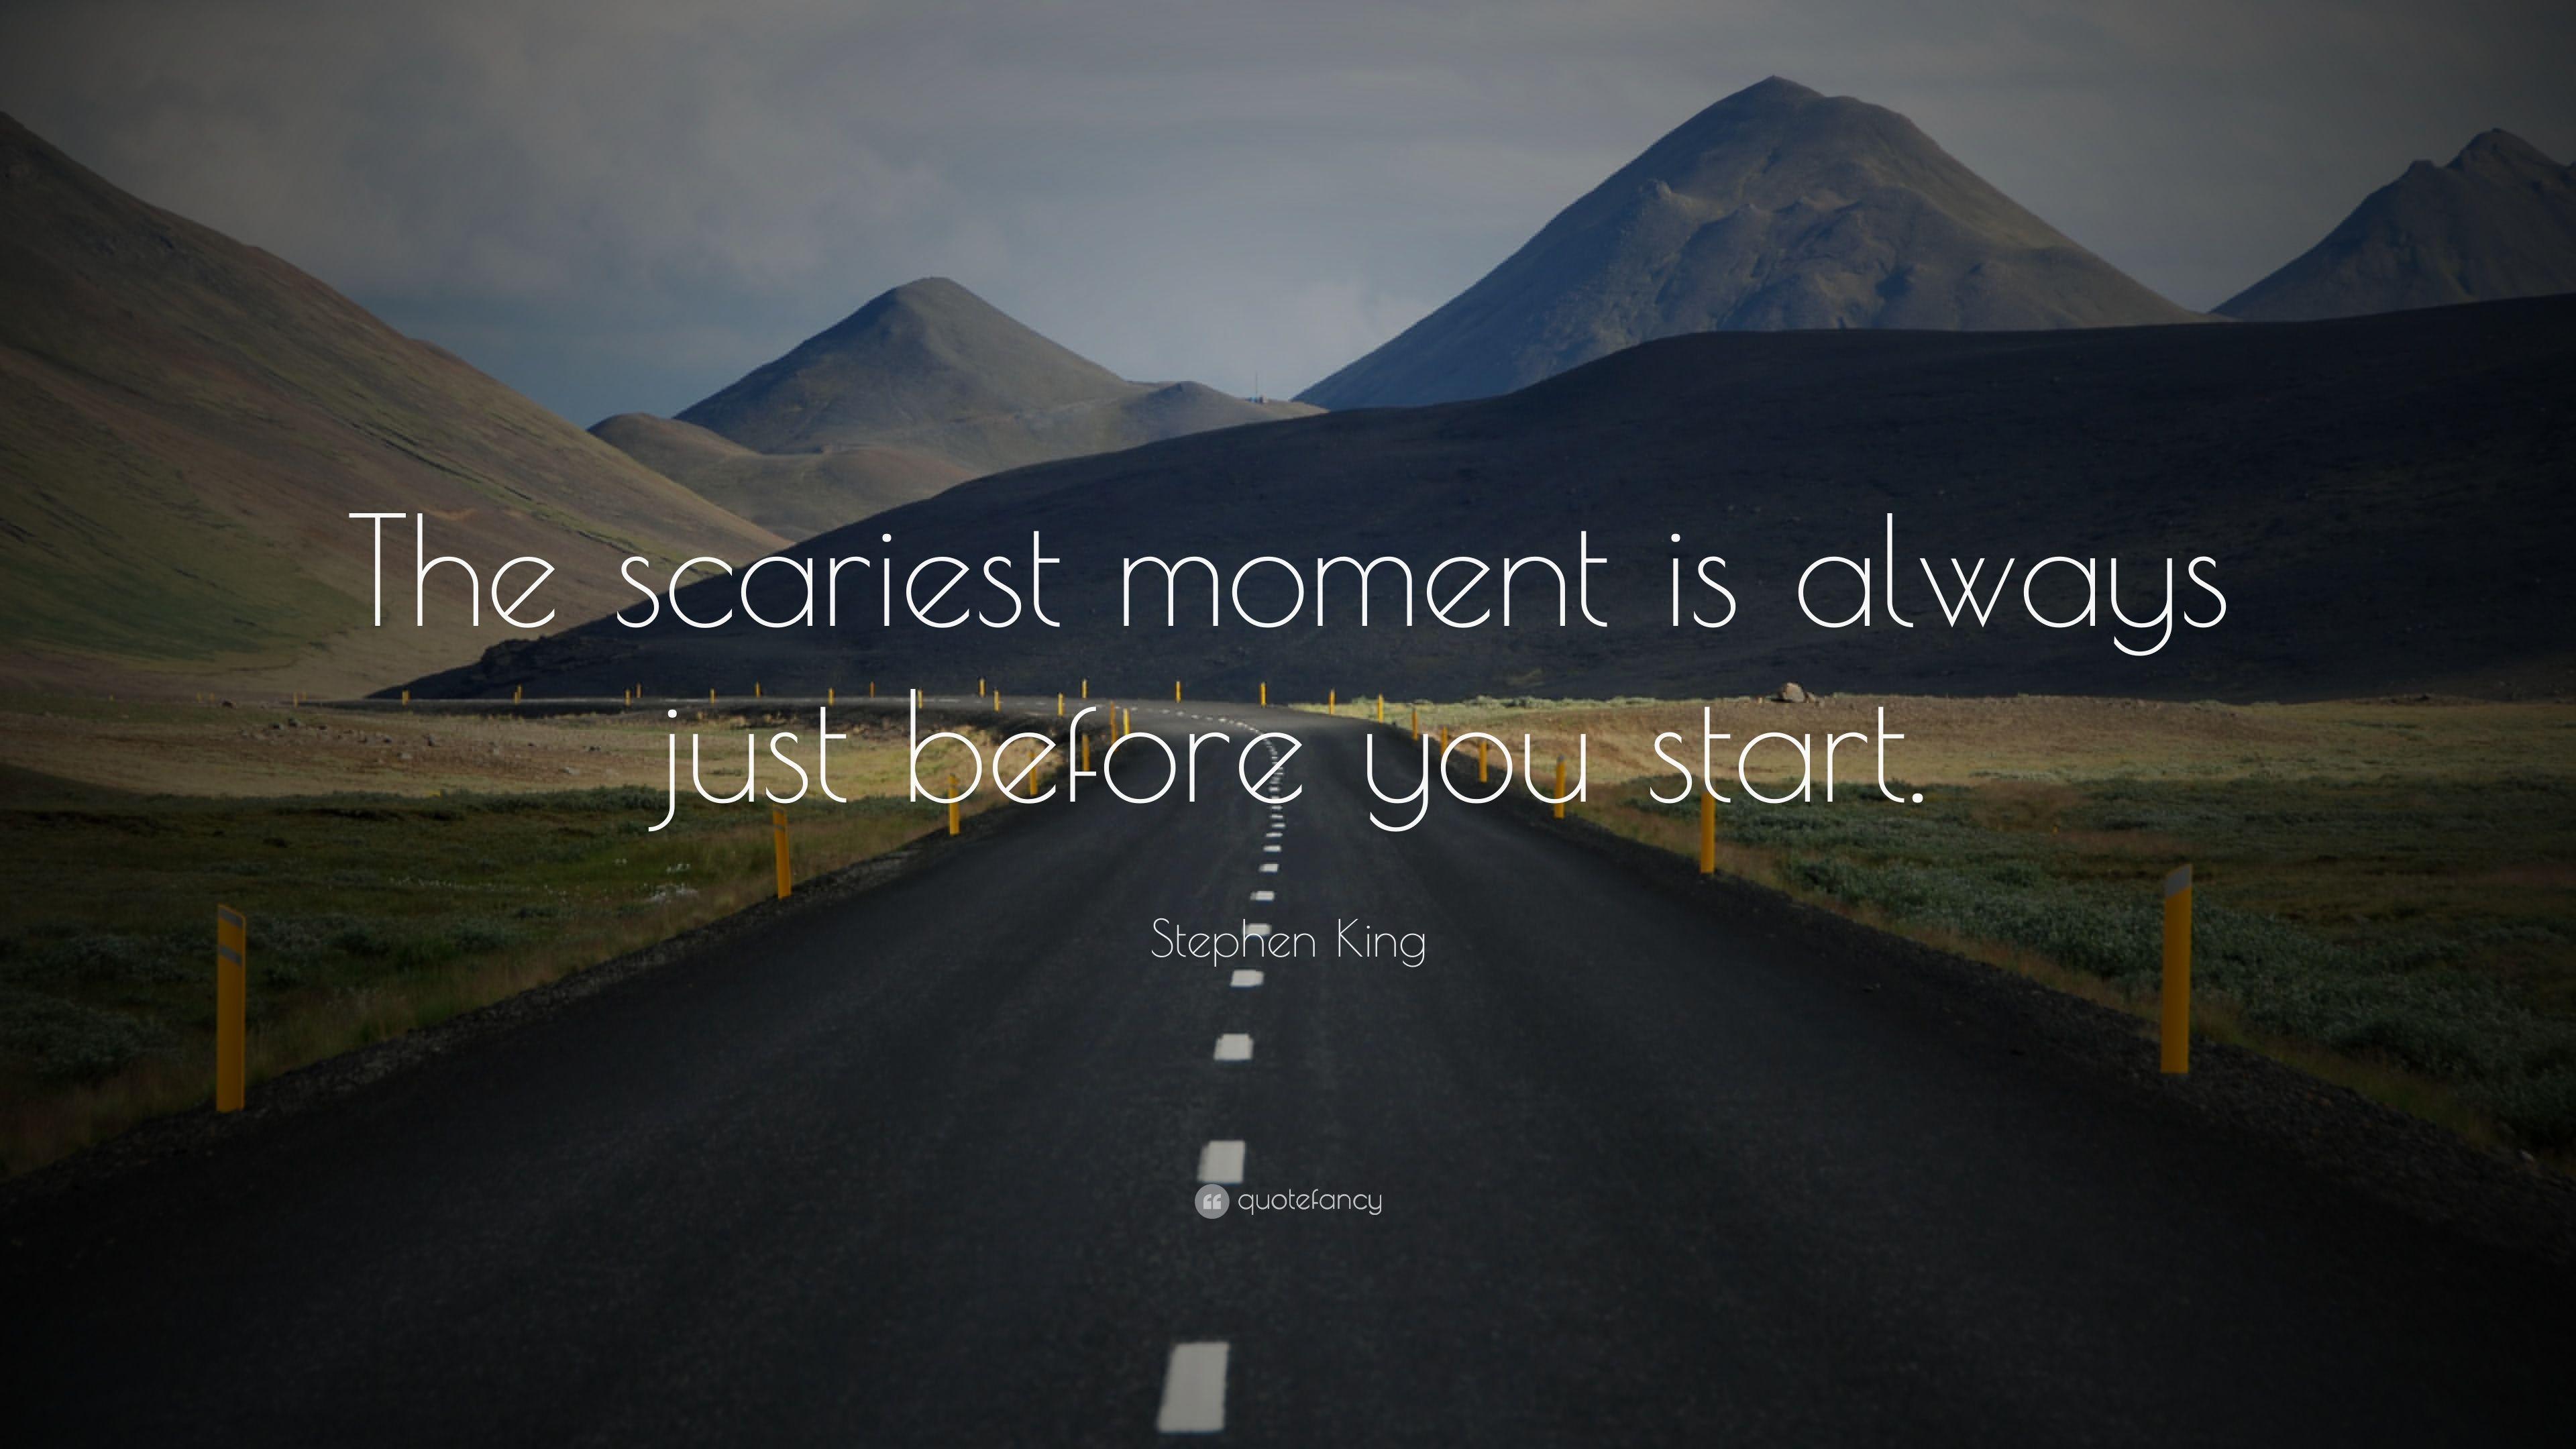 Stephen King Quote: “The scariest moment is always just before you